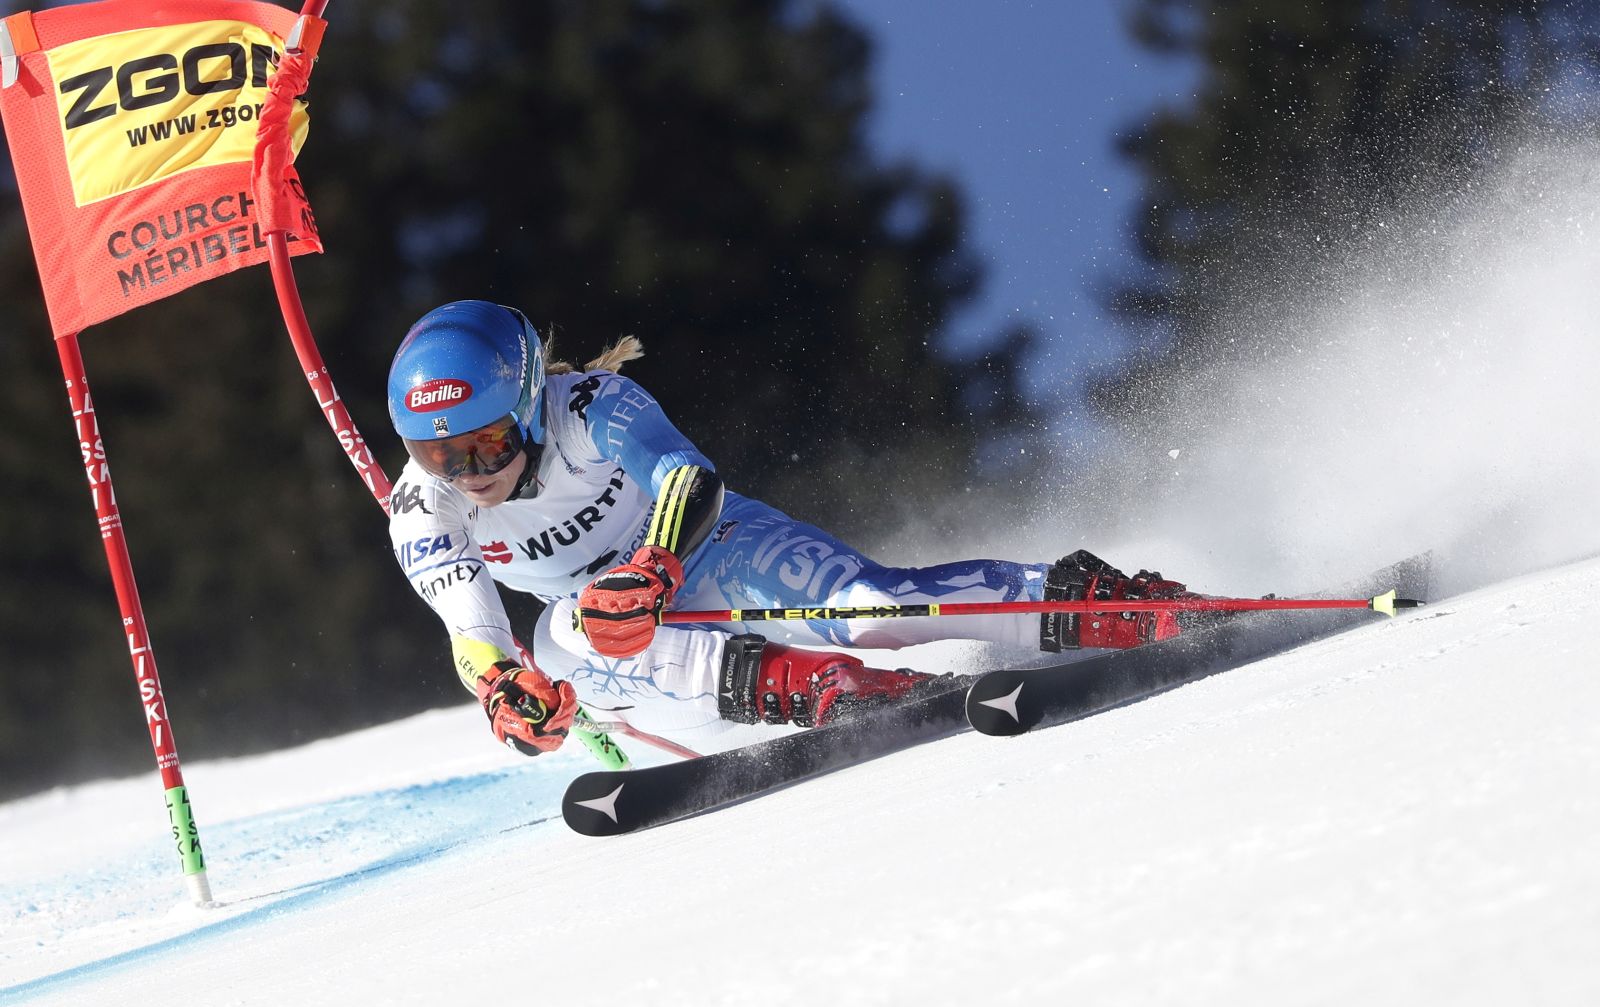 epa10469761 Mikaela Shiffrin of the US cuts a gate during the 1st run in the Women's Giant Slalom event at the FIS Alpine Skiing World Championships in Meribel, France, 16 February 2023.  EPA/GUILLAUME HORCAJUELO